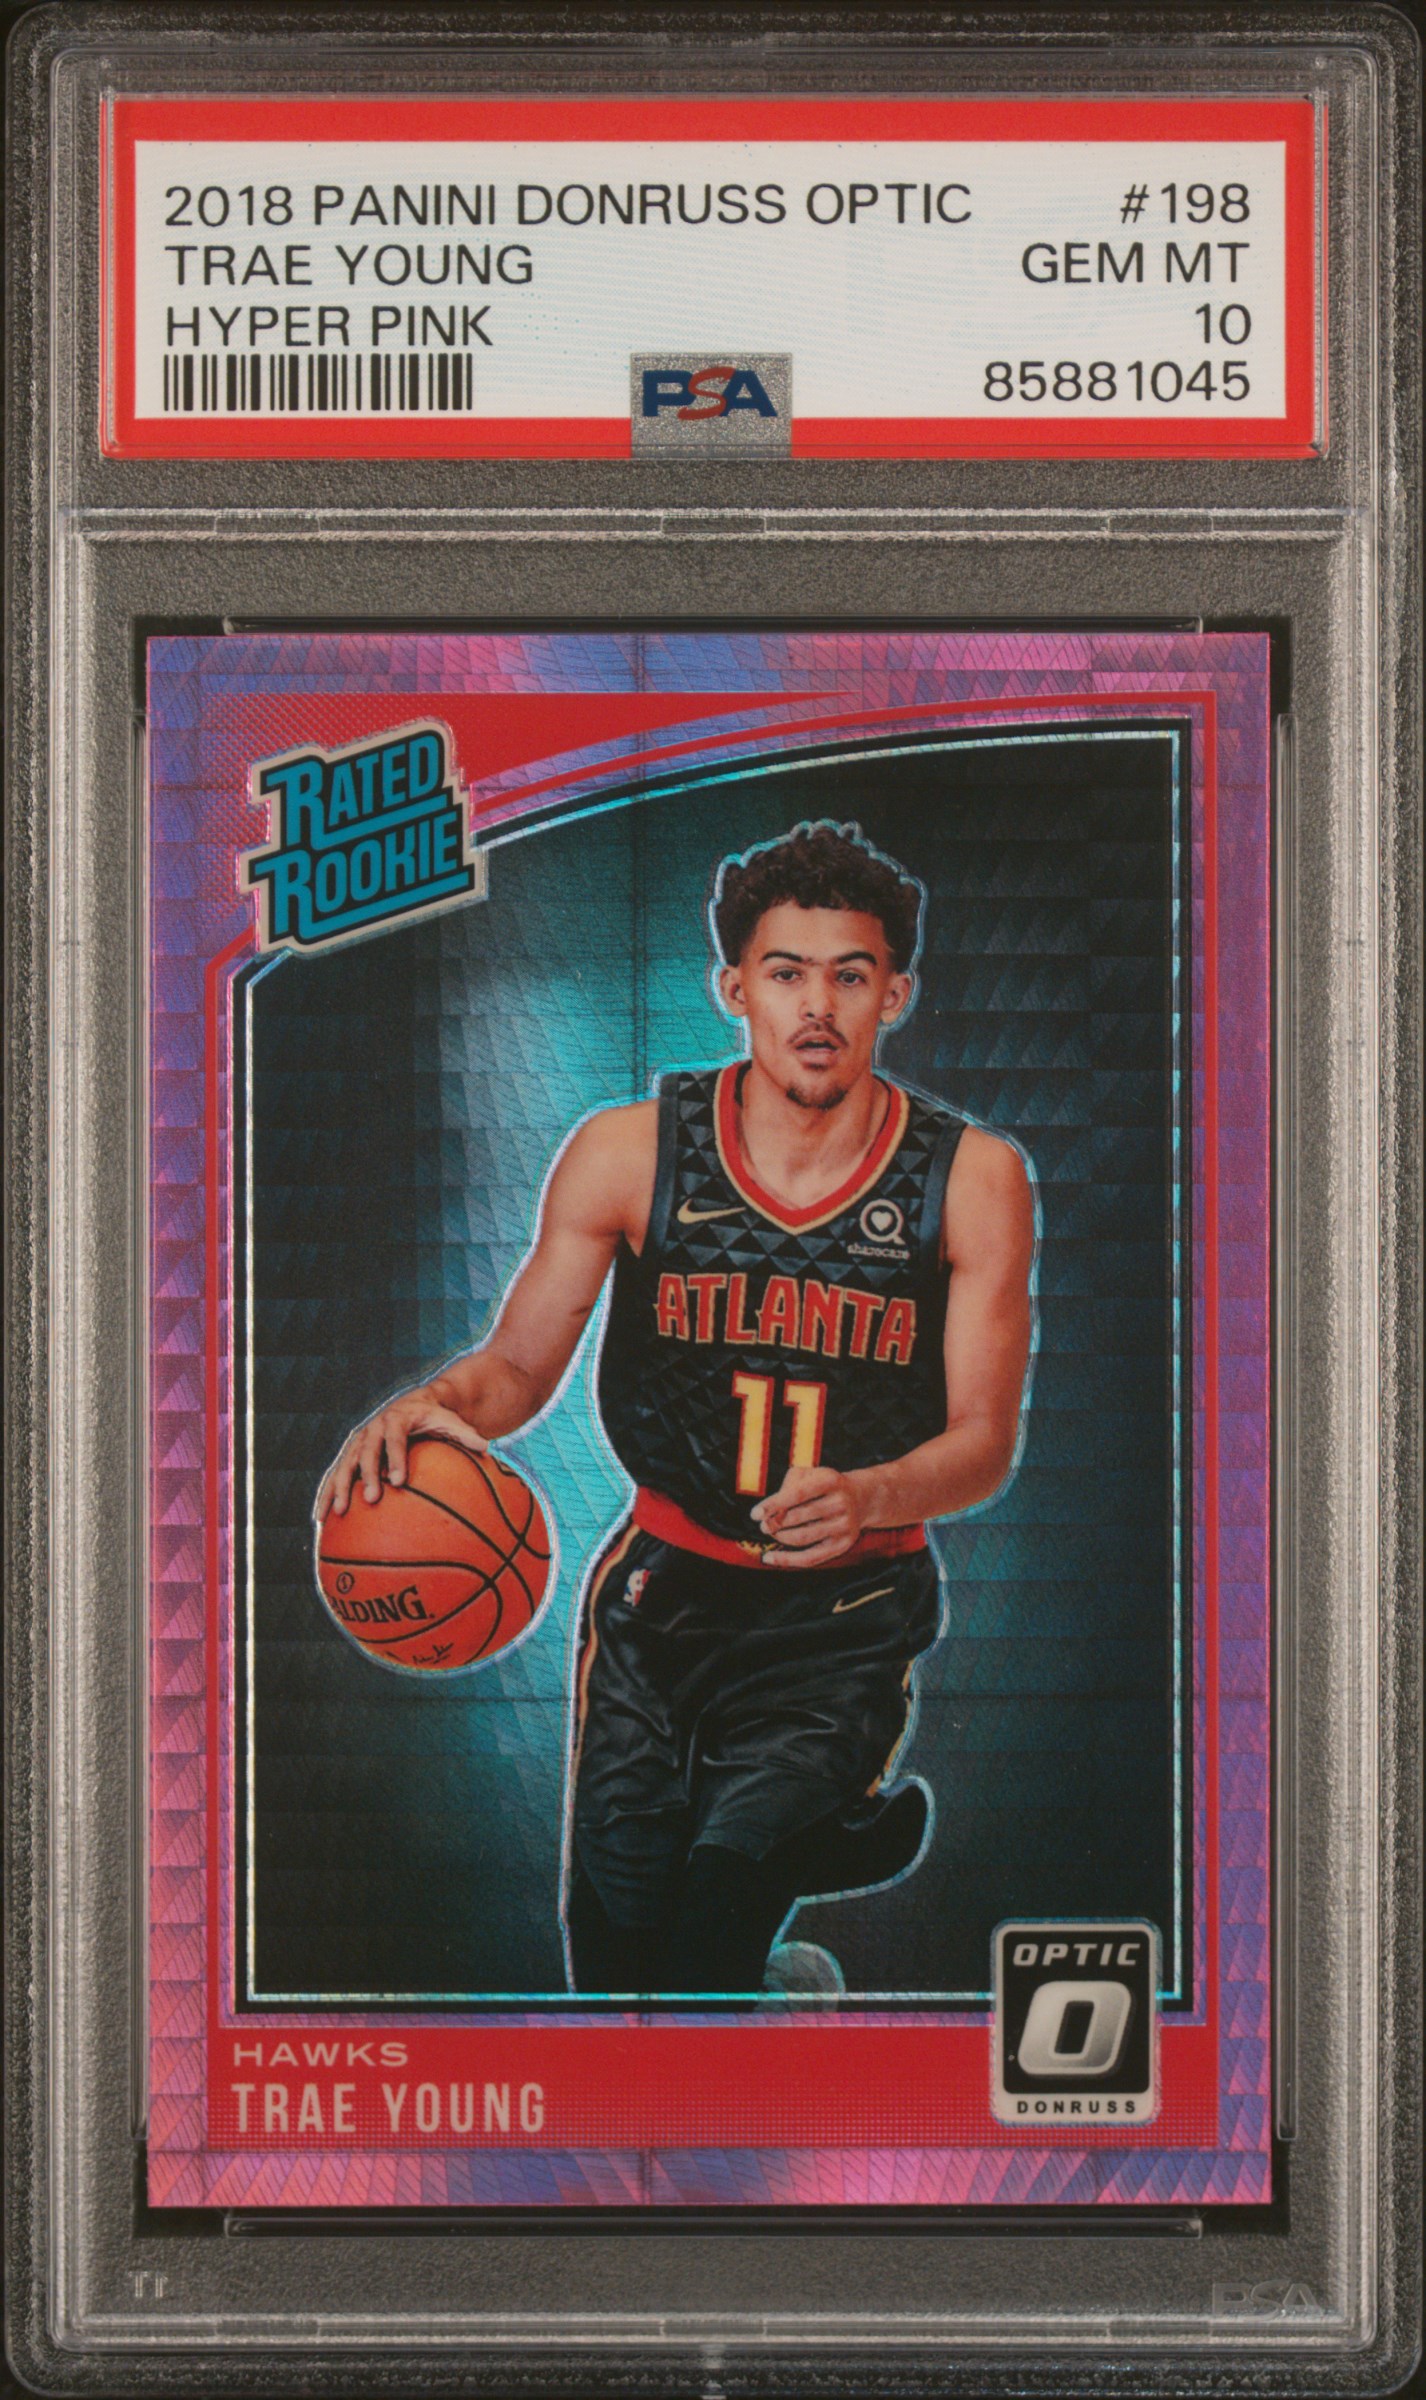 2018-19 Panini Donruss Optic Hyper Pink Rated Rookie #198 Trae Young Rookie Card – PSA GEM MT 10